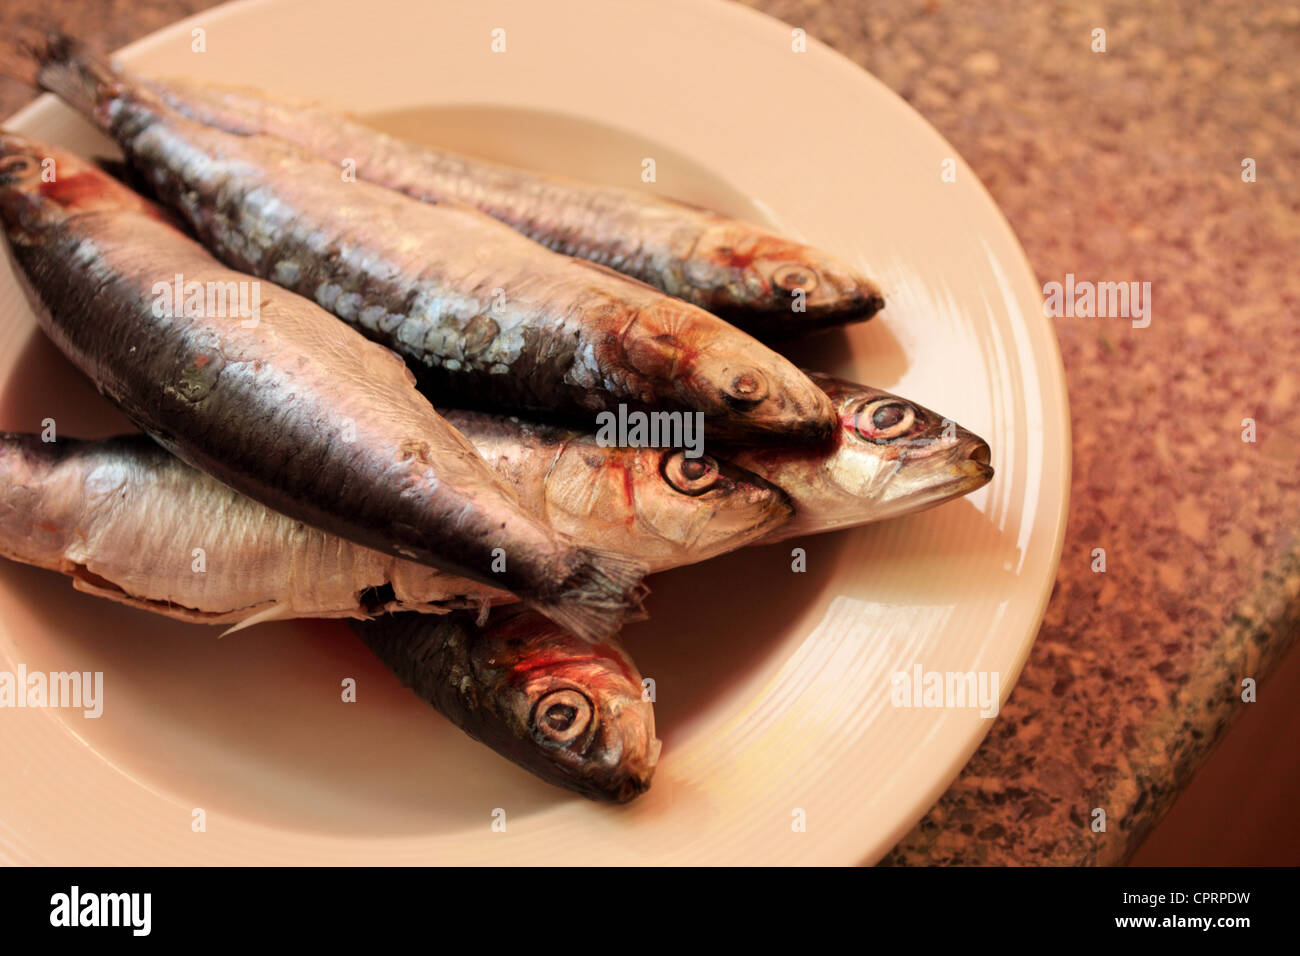 Bowl of Sardines on a kitchen top gutted and ready to grill or fry Stock Photo